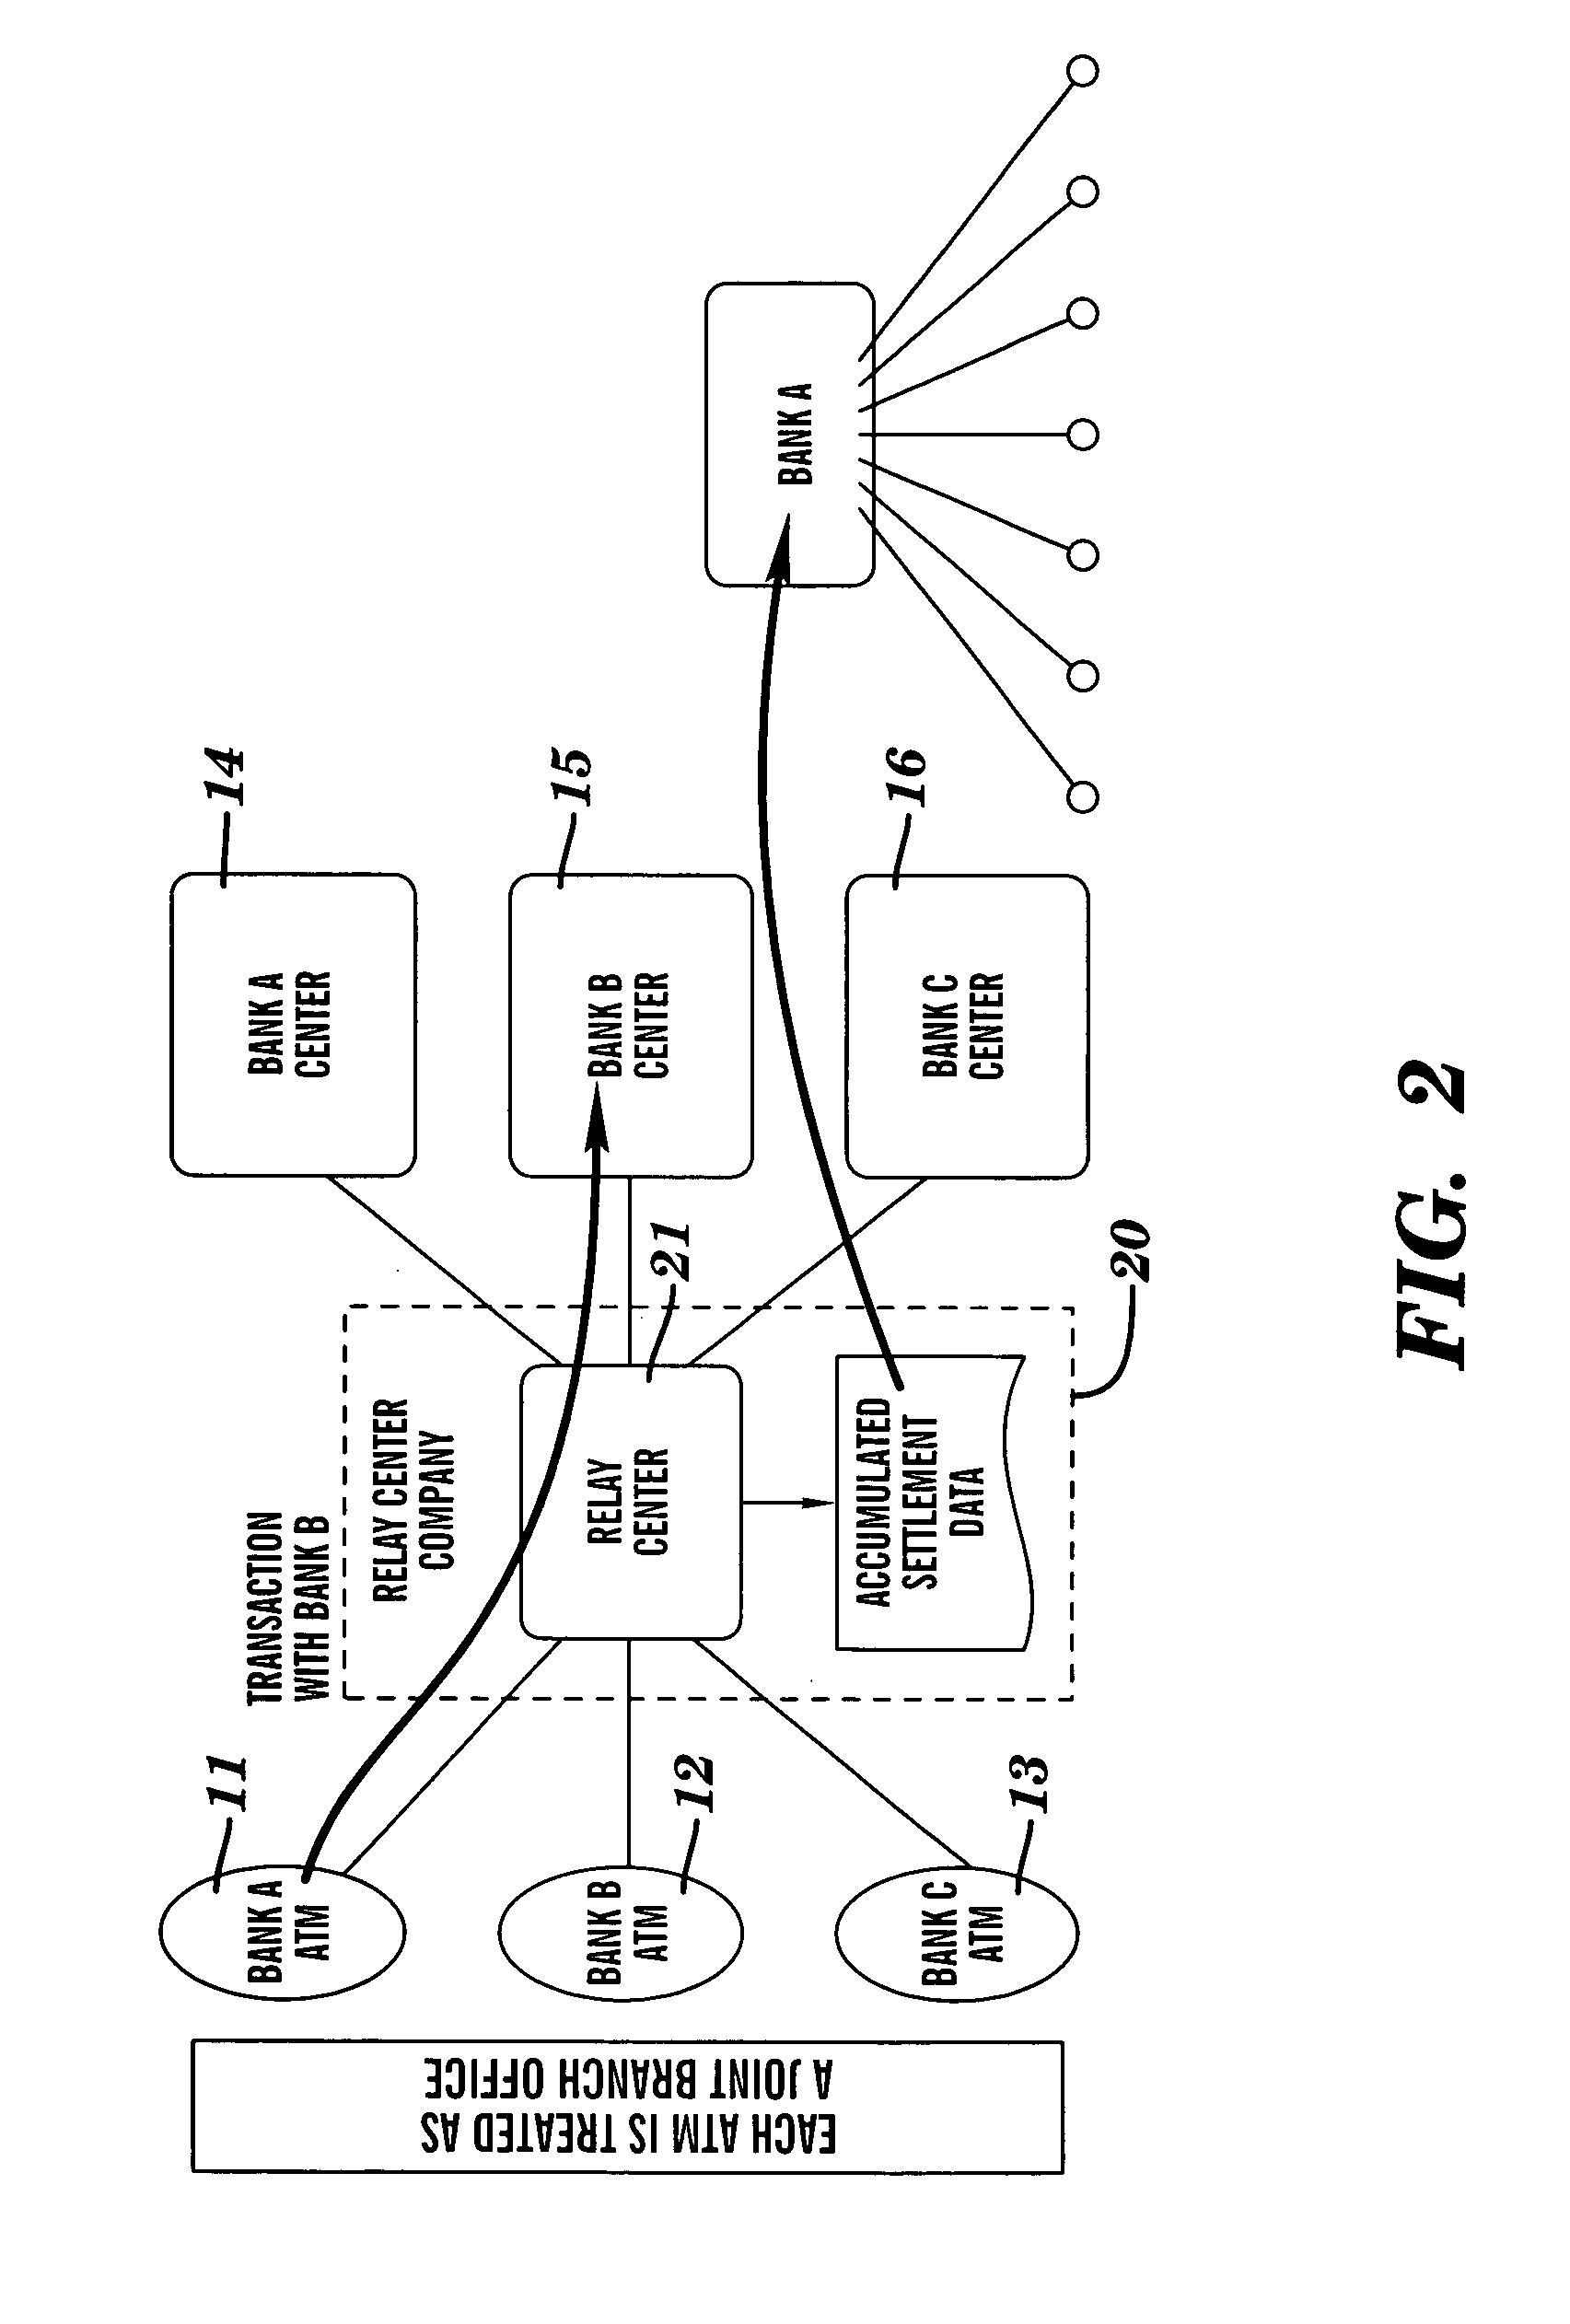 Automated teller machine system and method relay center